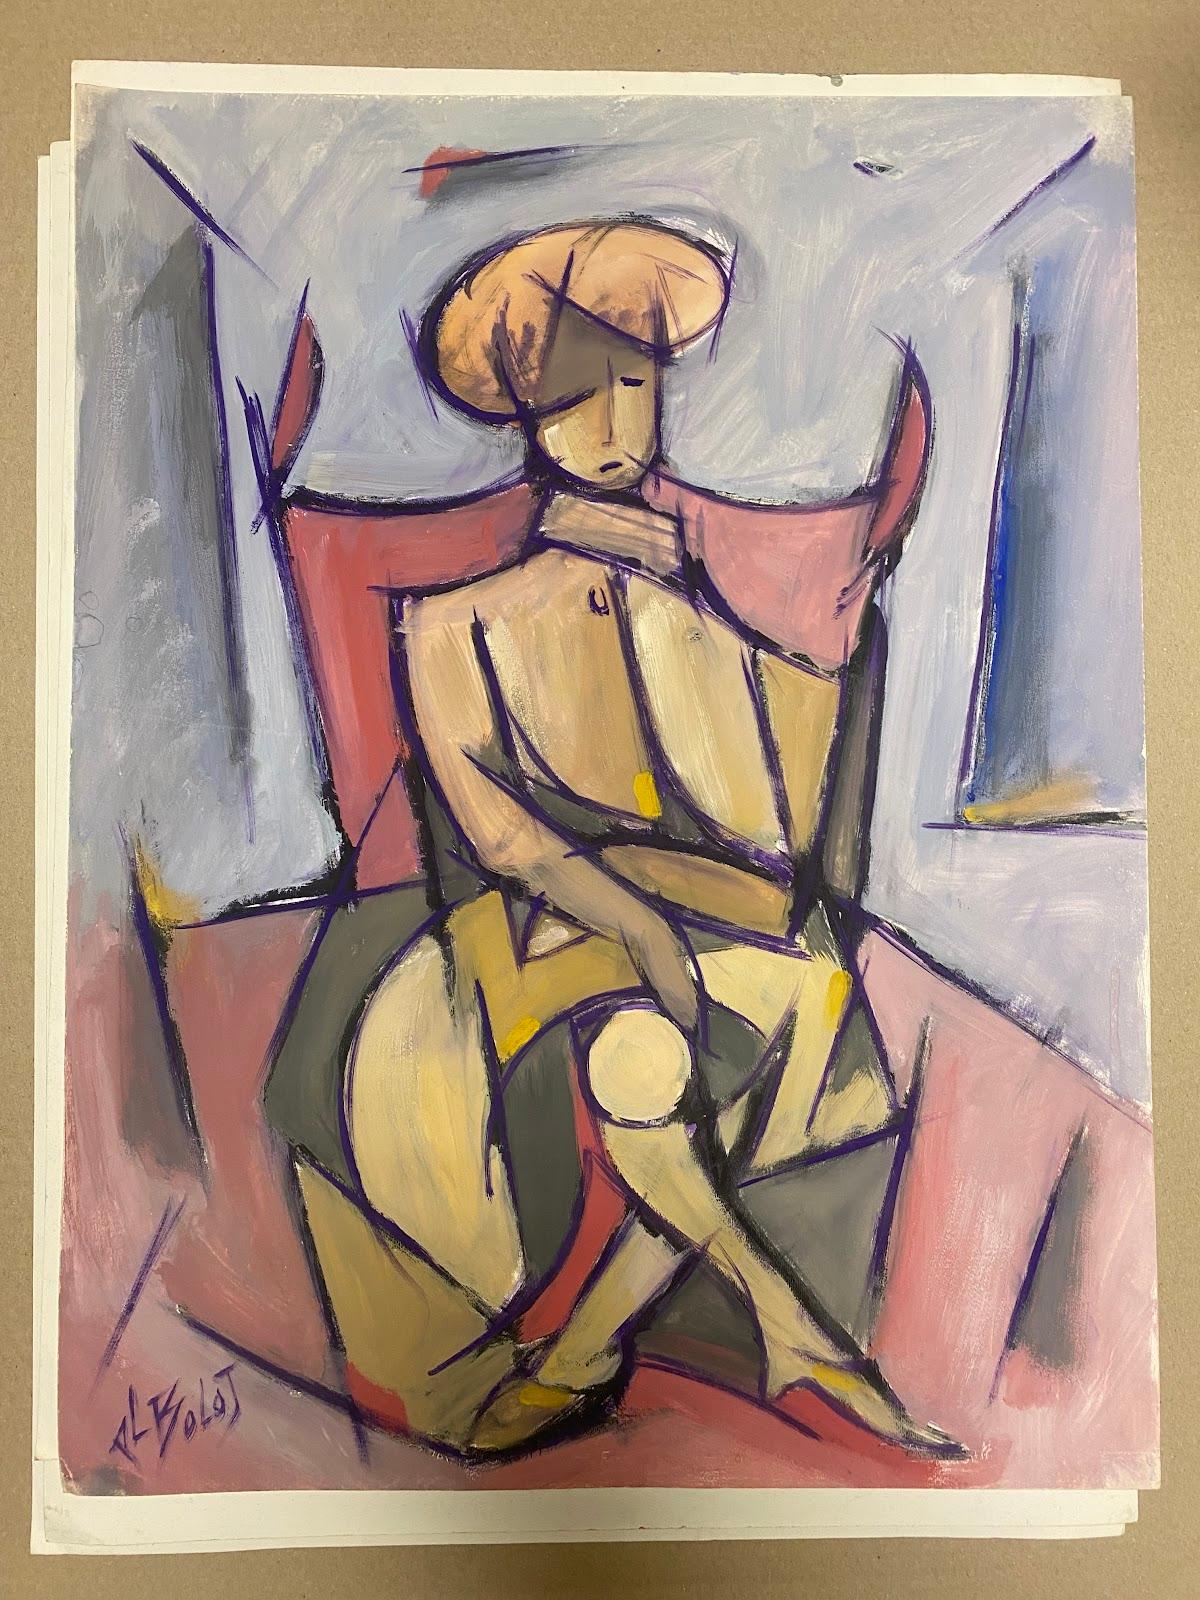 by Paul-Louis Bolot (French 1918-2003)
signed
original gouache painting on thick paper/ card
unframed
condition: very good and sound; the edges have a few curls and scuffs/ edge tears which should all cover once flattened or framed. 
provenance: all